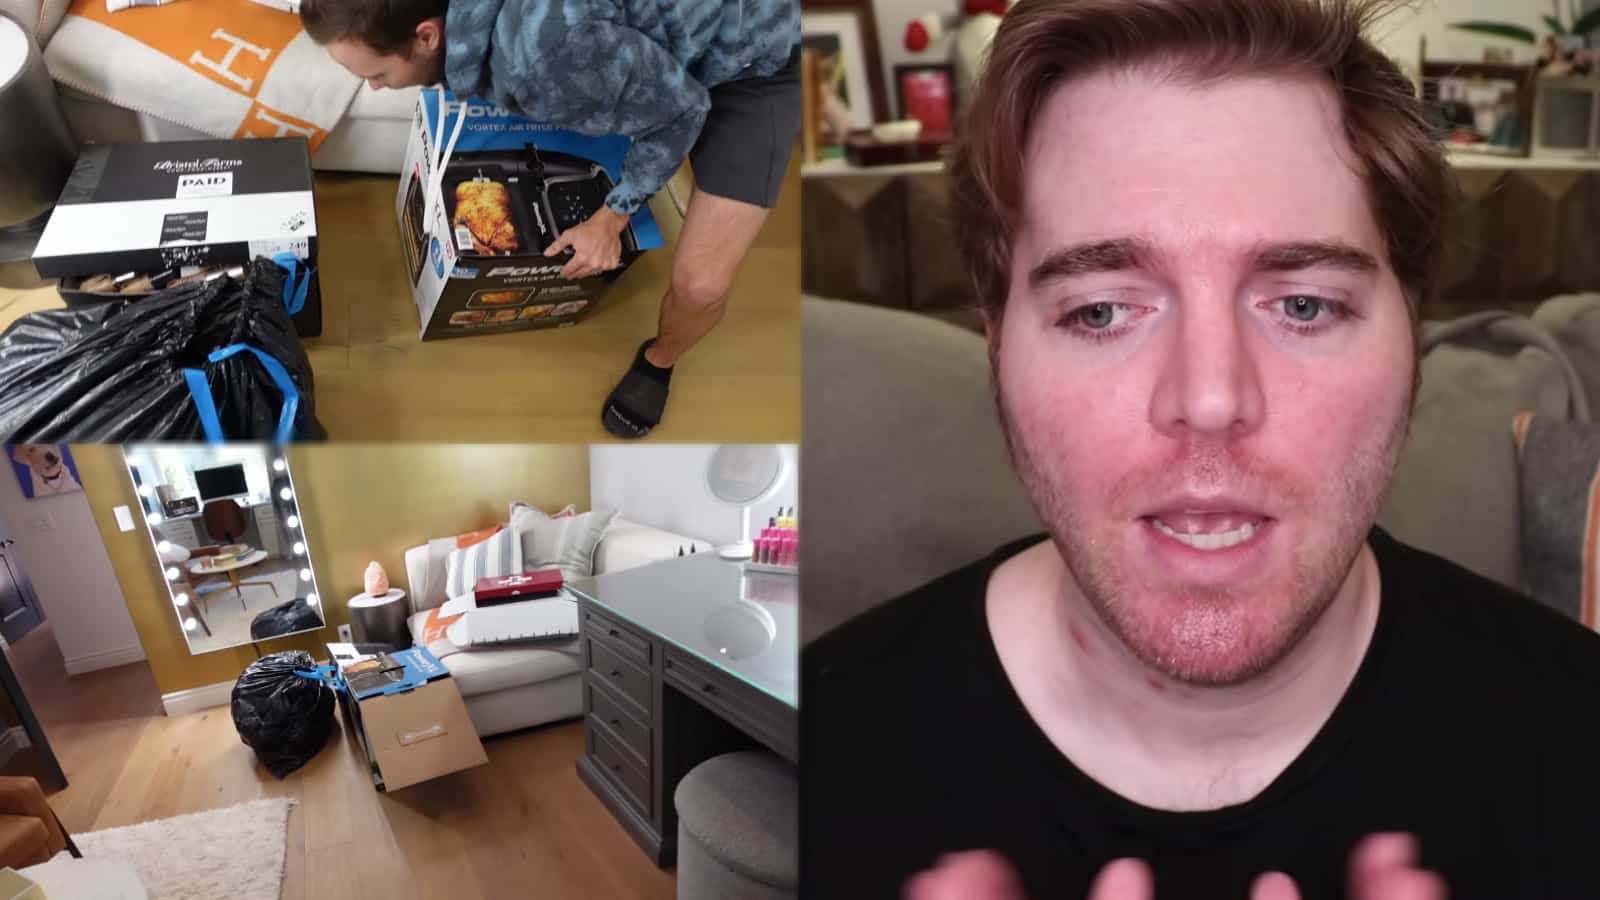 Image showing boxes of makeup and Shane Dawson